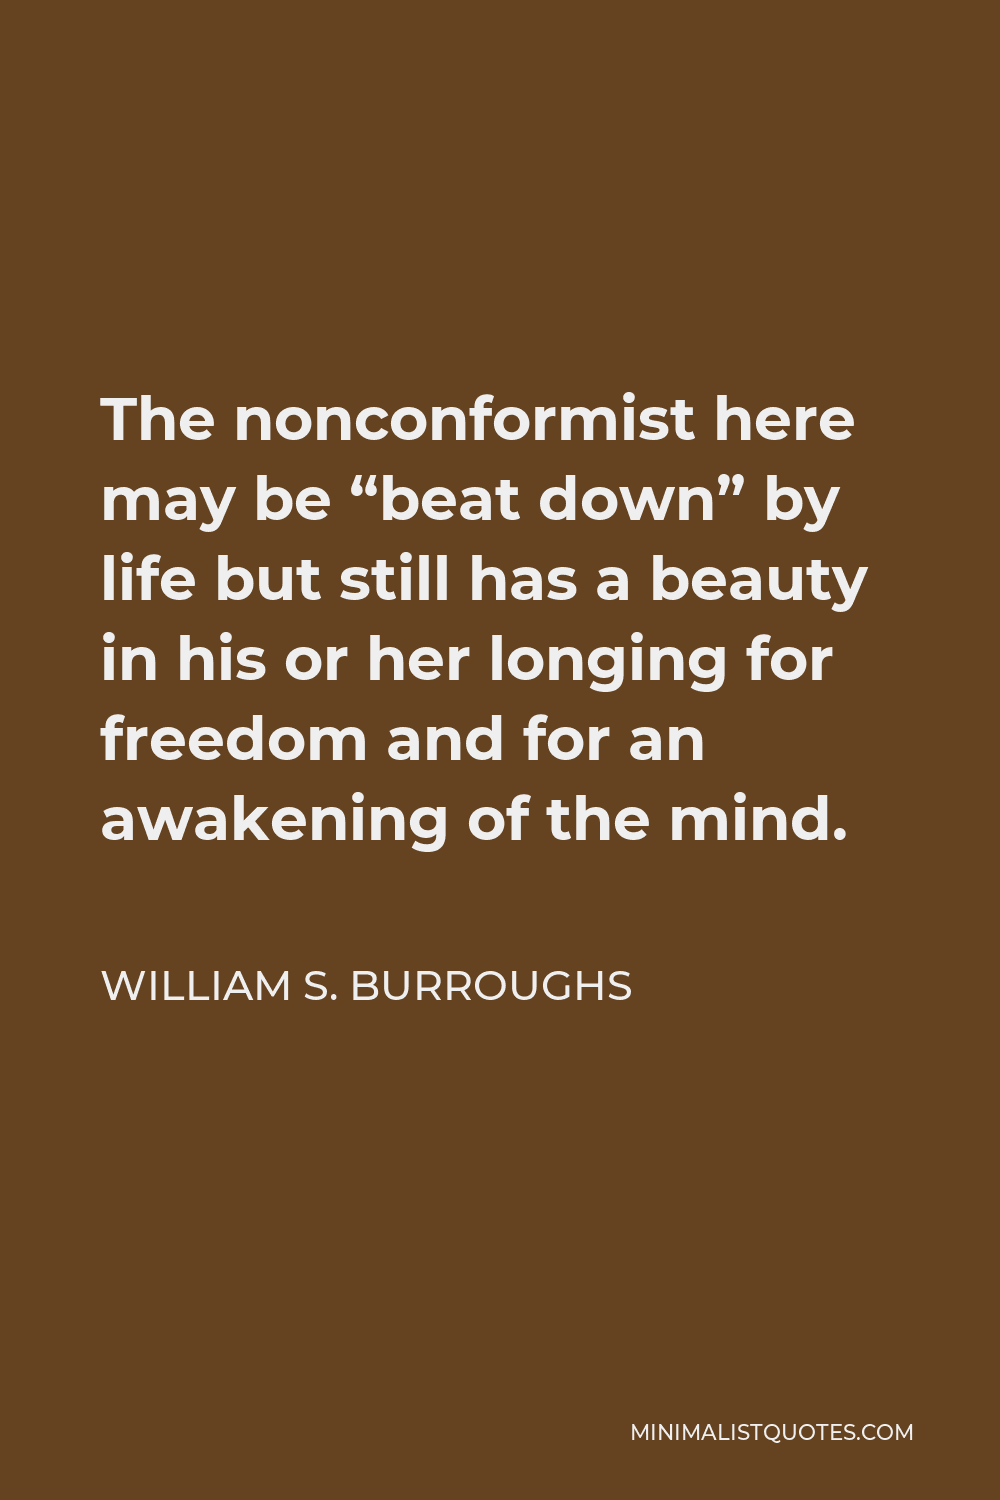 William S. Burroughs Quote - The nonconformist here may be “beat down” by life but still has a beauty in his or her longing for freedom and for an awakening of the mind.